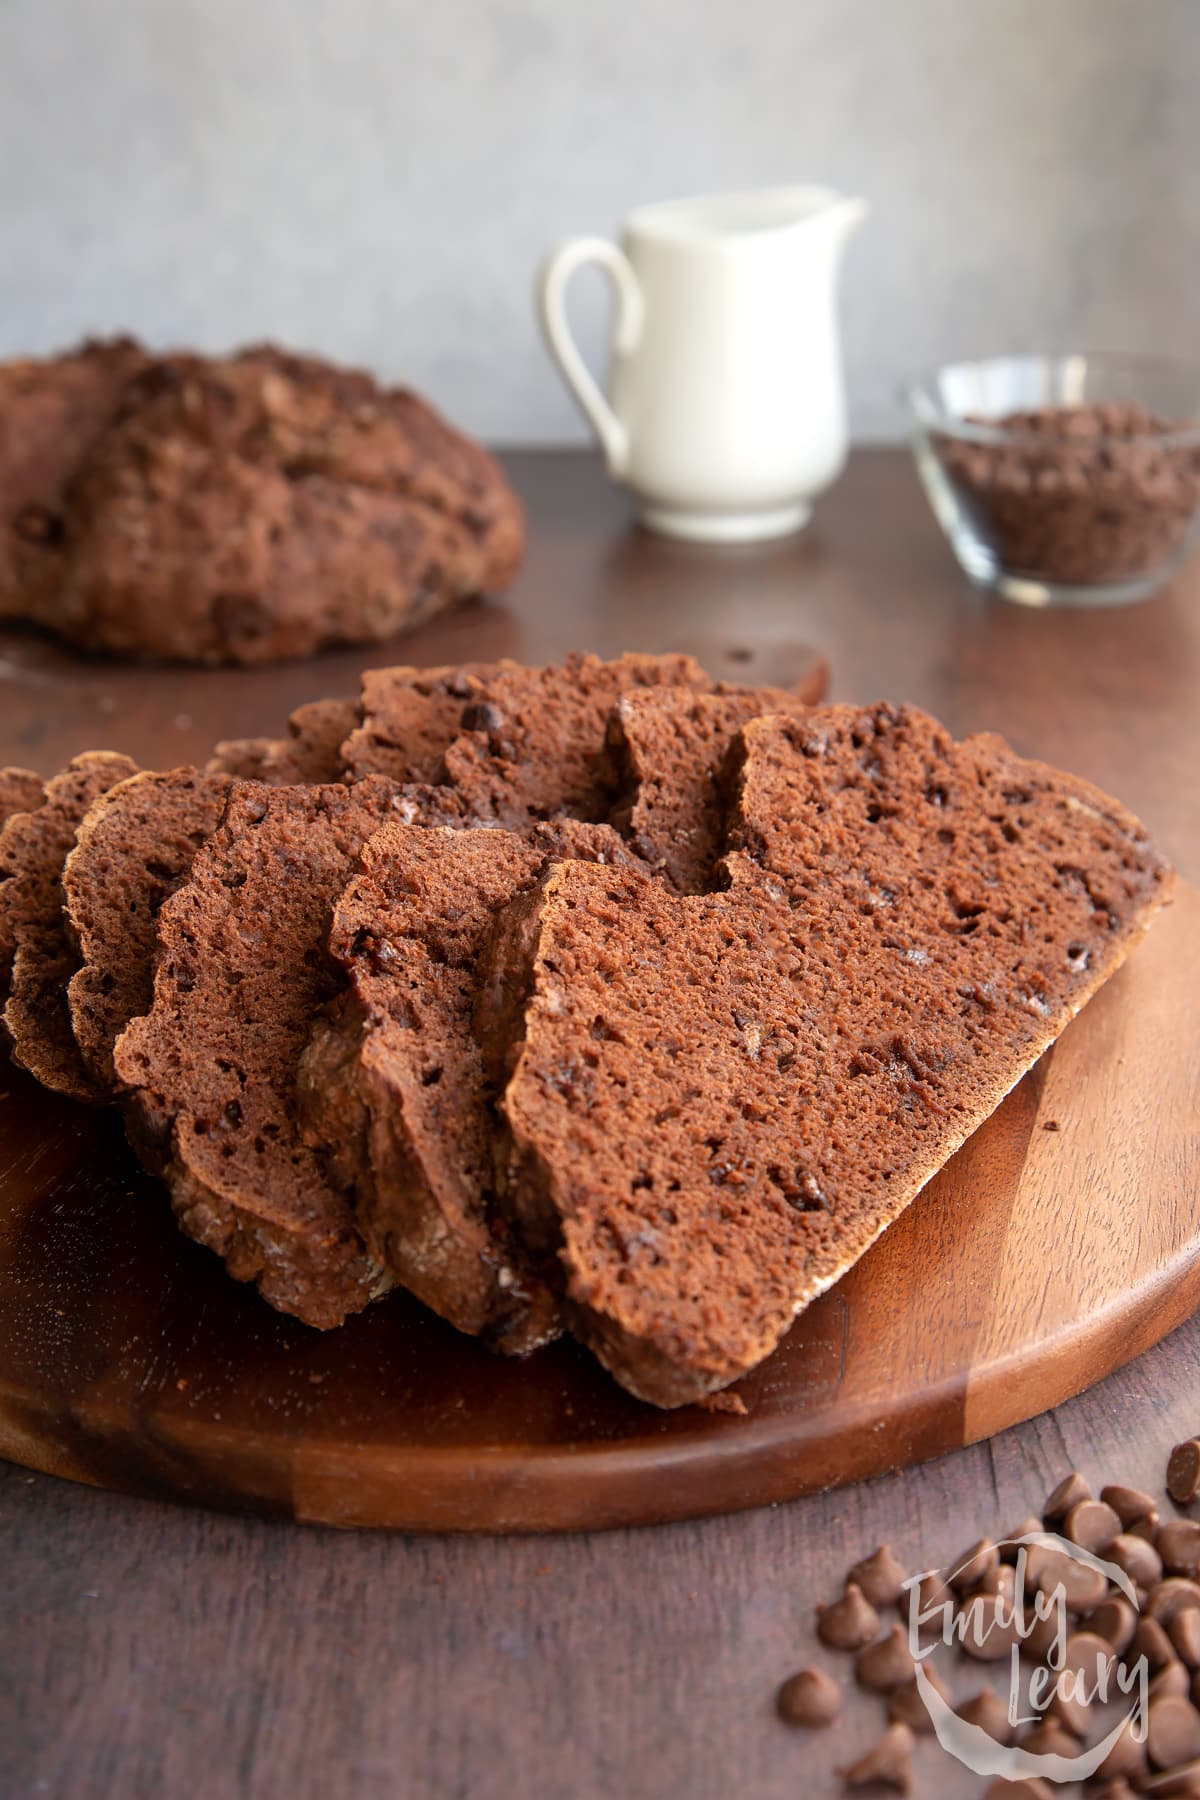 Close up shot of the sliced chocolate soda bread on a wooden board.